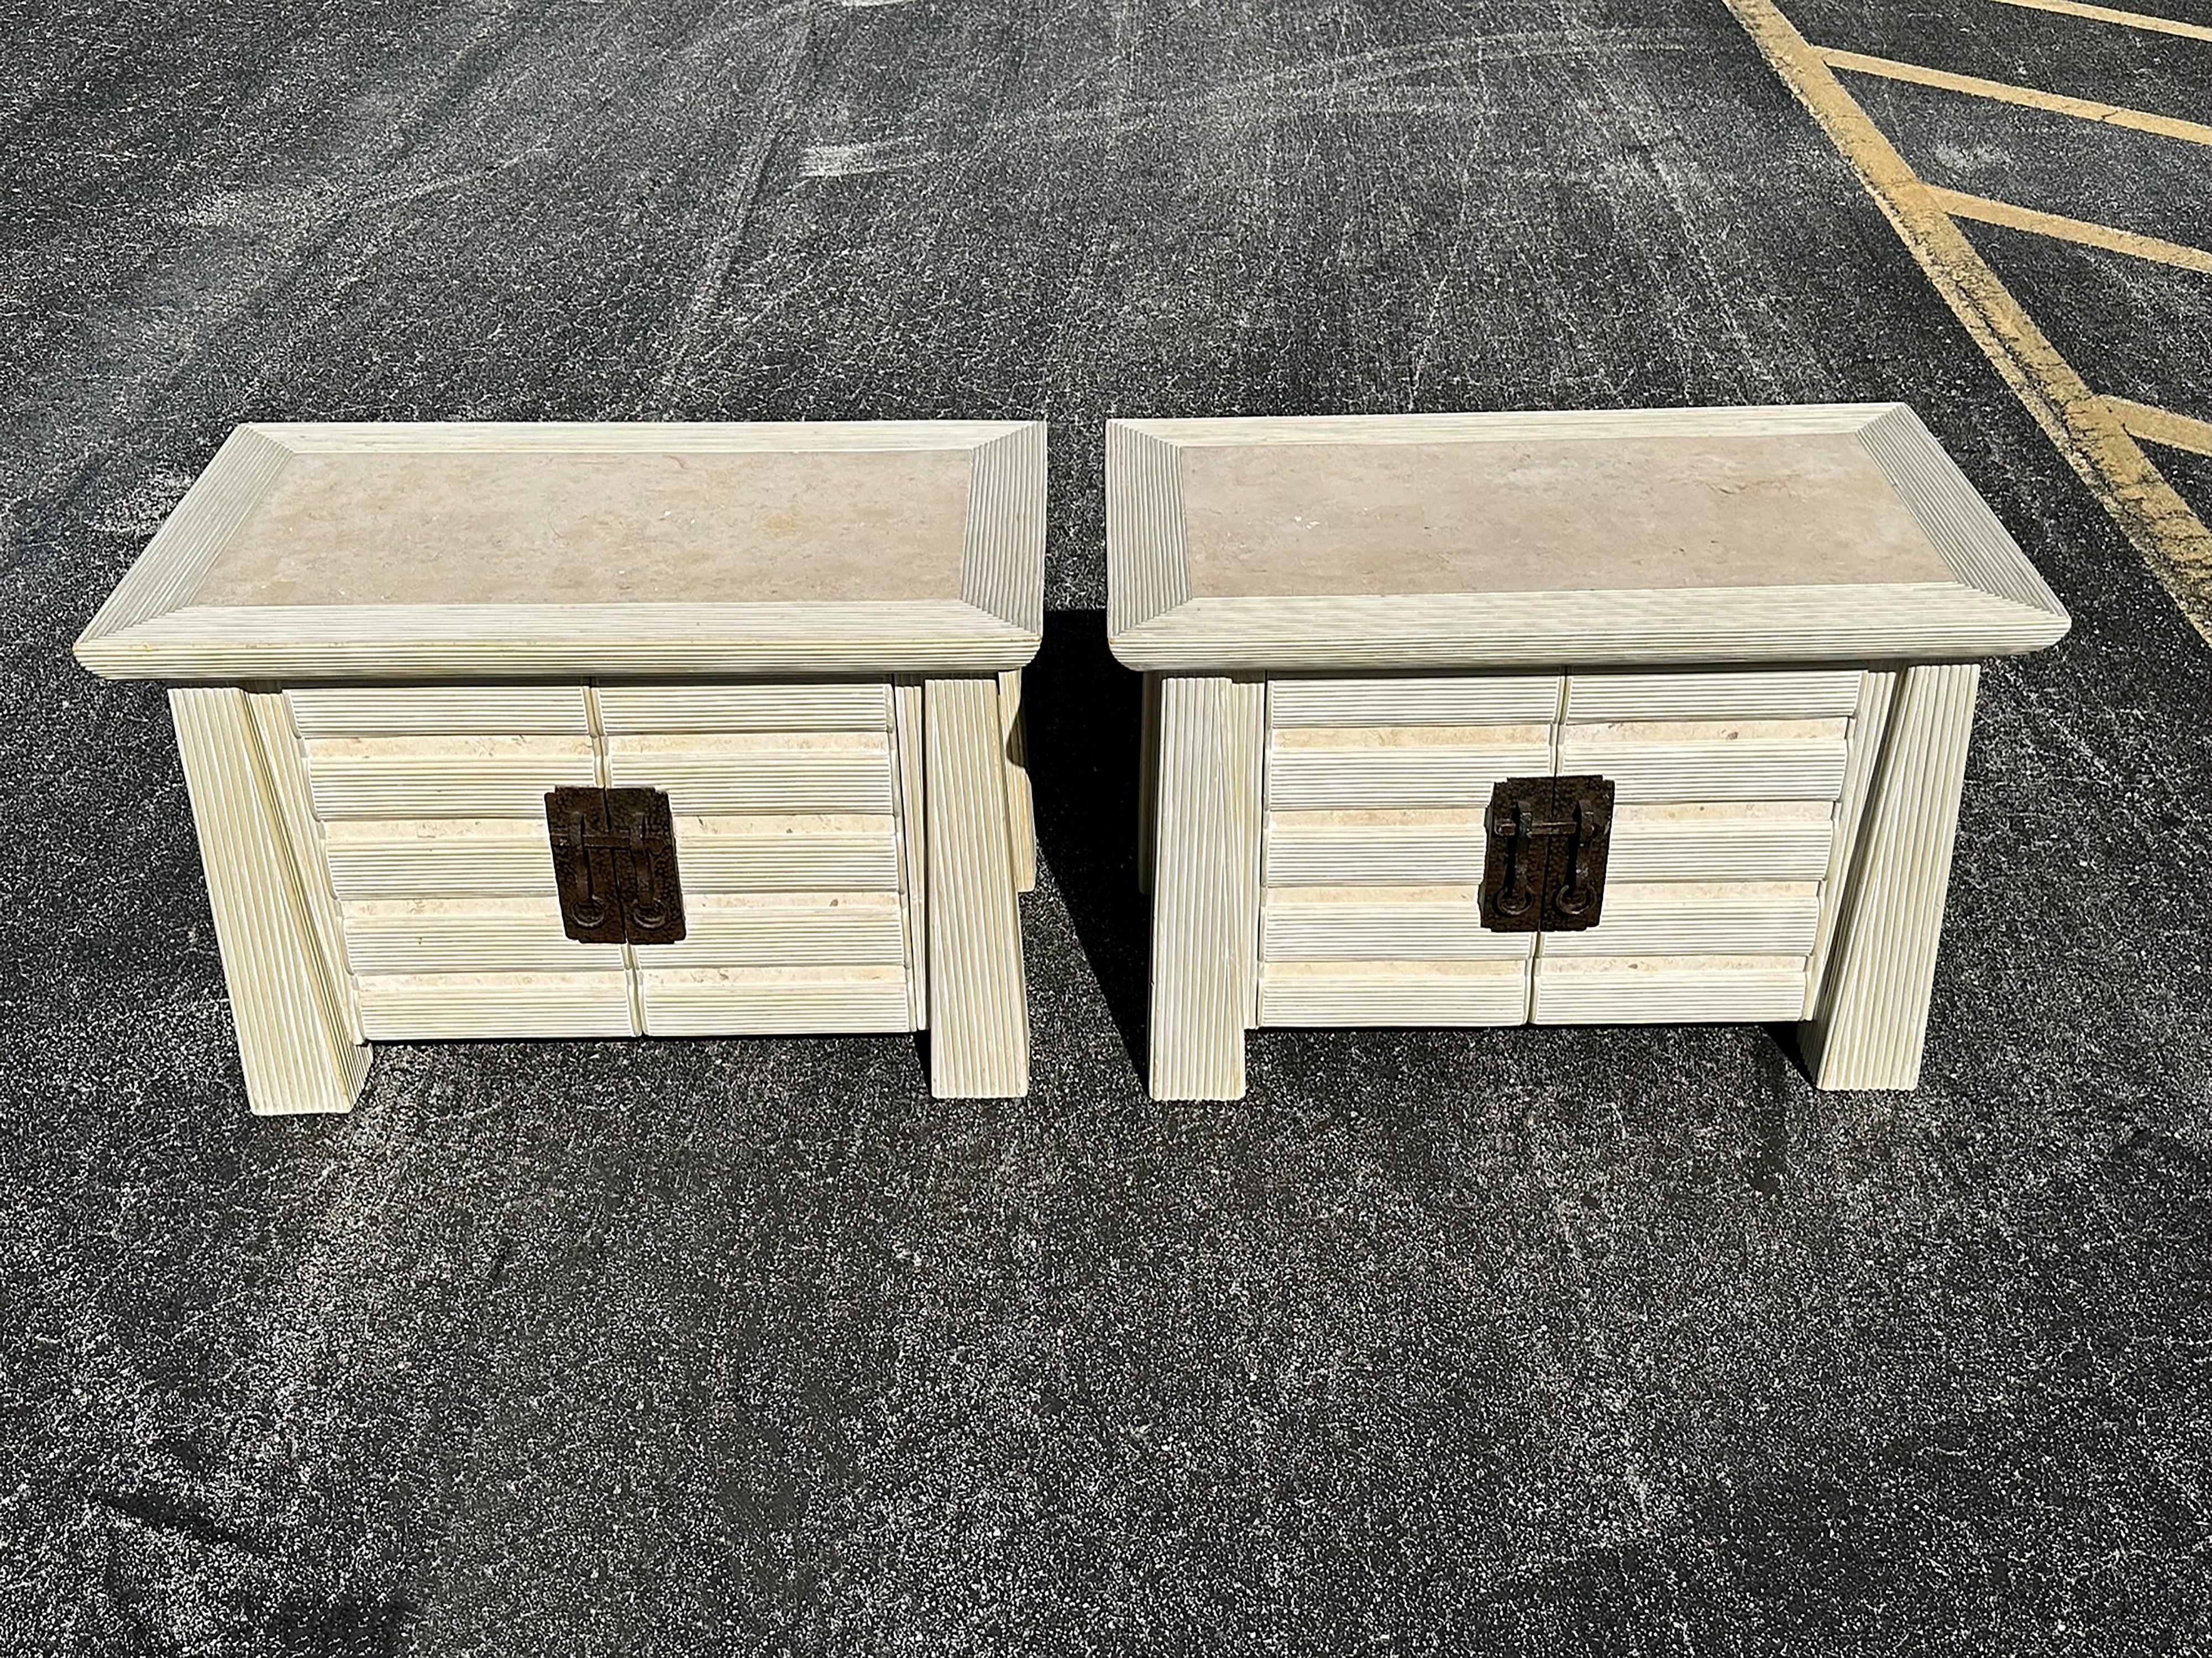 Vintage post modern pair of pagoda side tables, pencil reed frames with travertine stone top and sides. Unique hammered metal closure. Finished on the back so they can be placed anywhere in the room. Heavy duty quality construction. These commodes